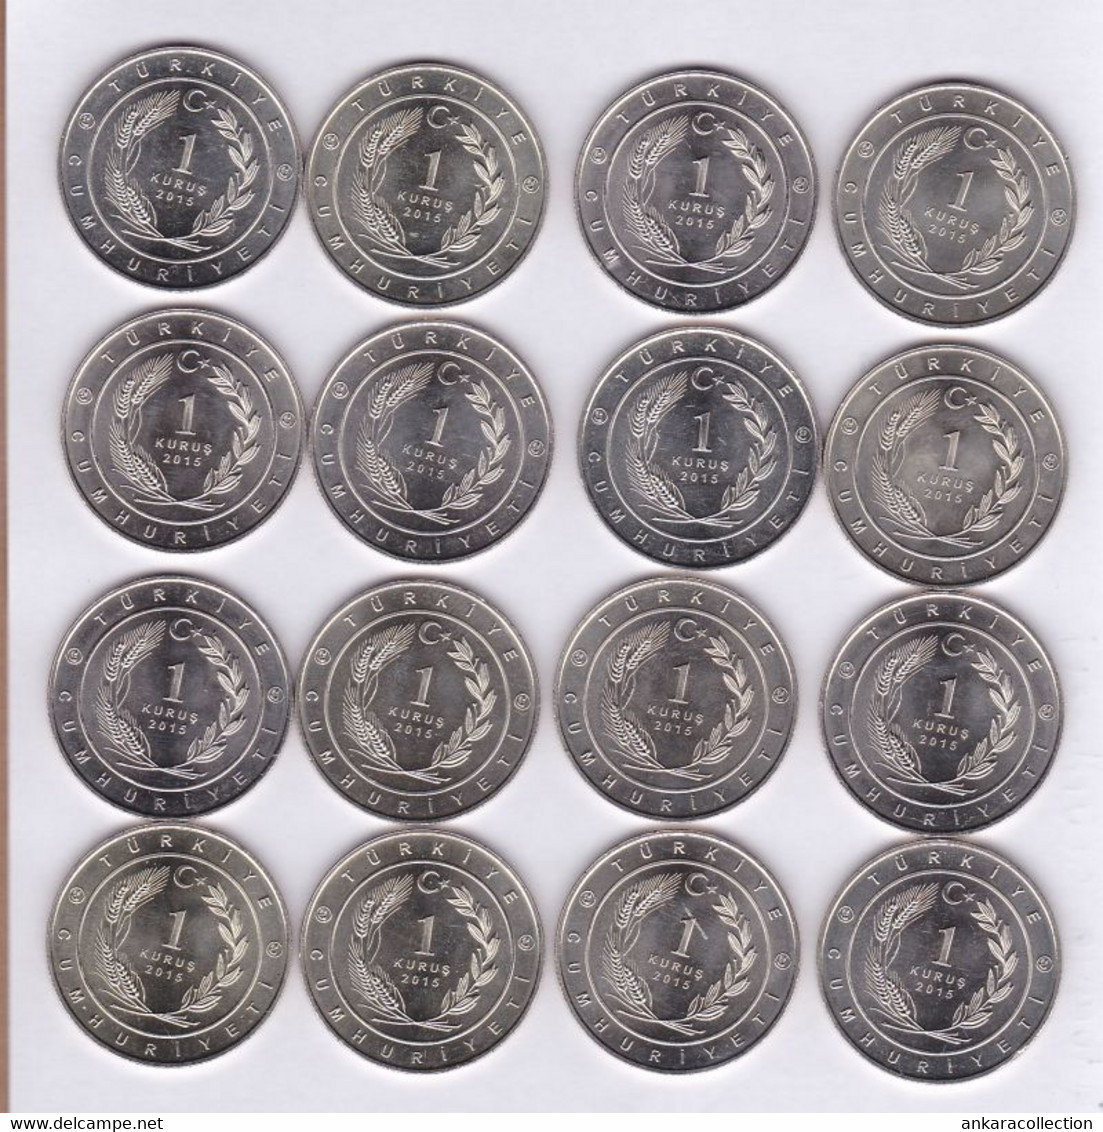 AC - TURKISH STATES IN HISTORY - 16 PIECES COINS COMMEMORATIVE COINS TURKEY 2016 - Turquie